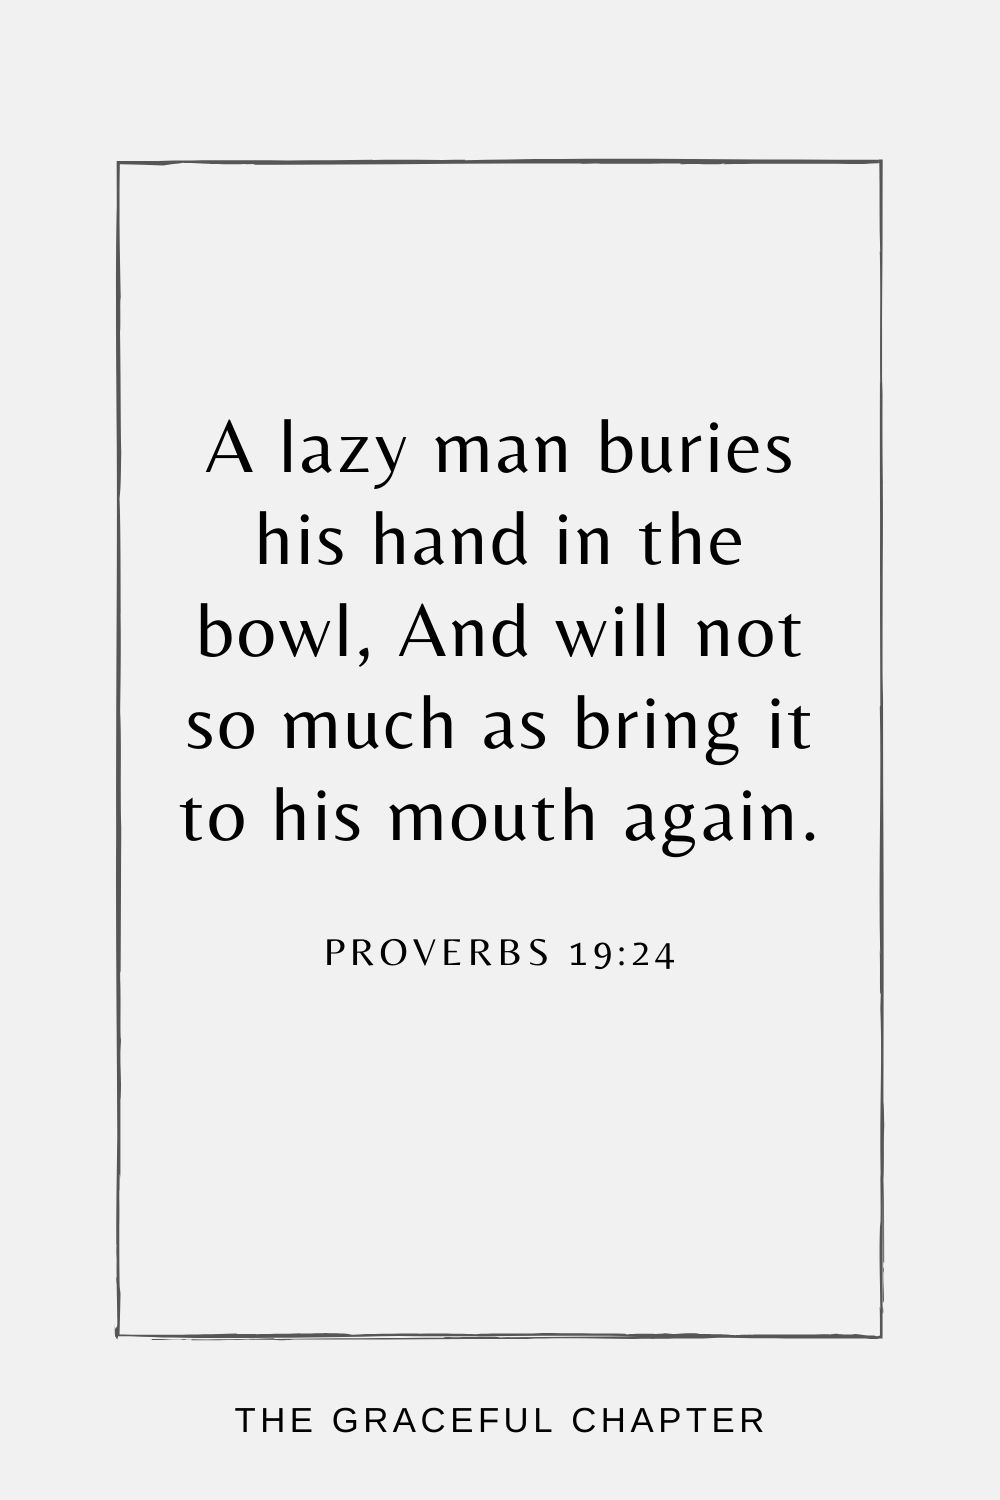 A lazy man buries his hand in the bowl, And will not so much as bring it to his mouth again. Proverbs 19:24